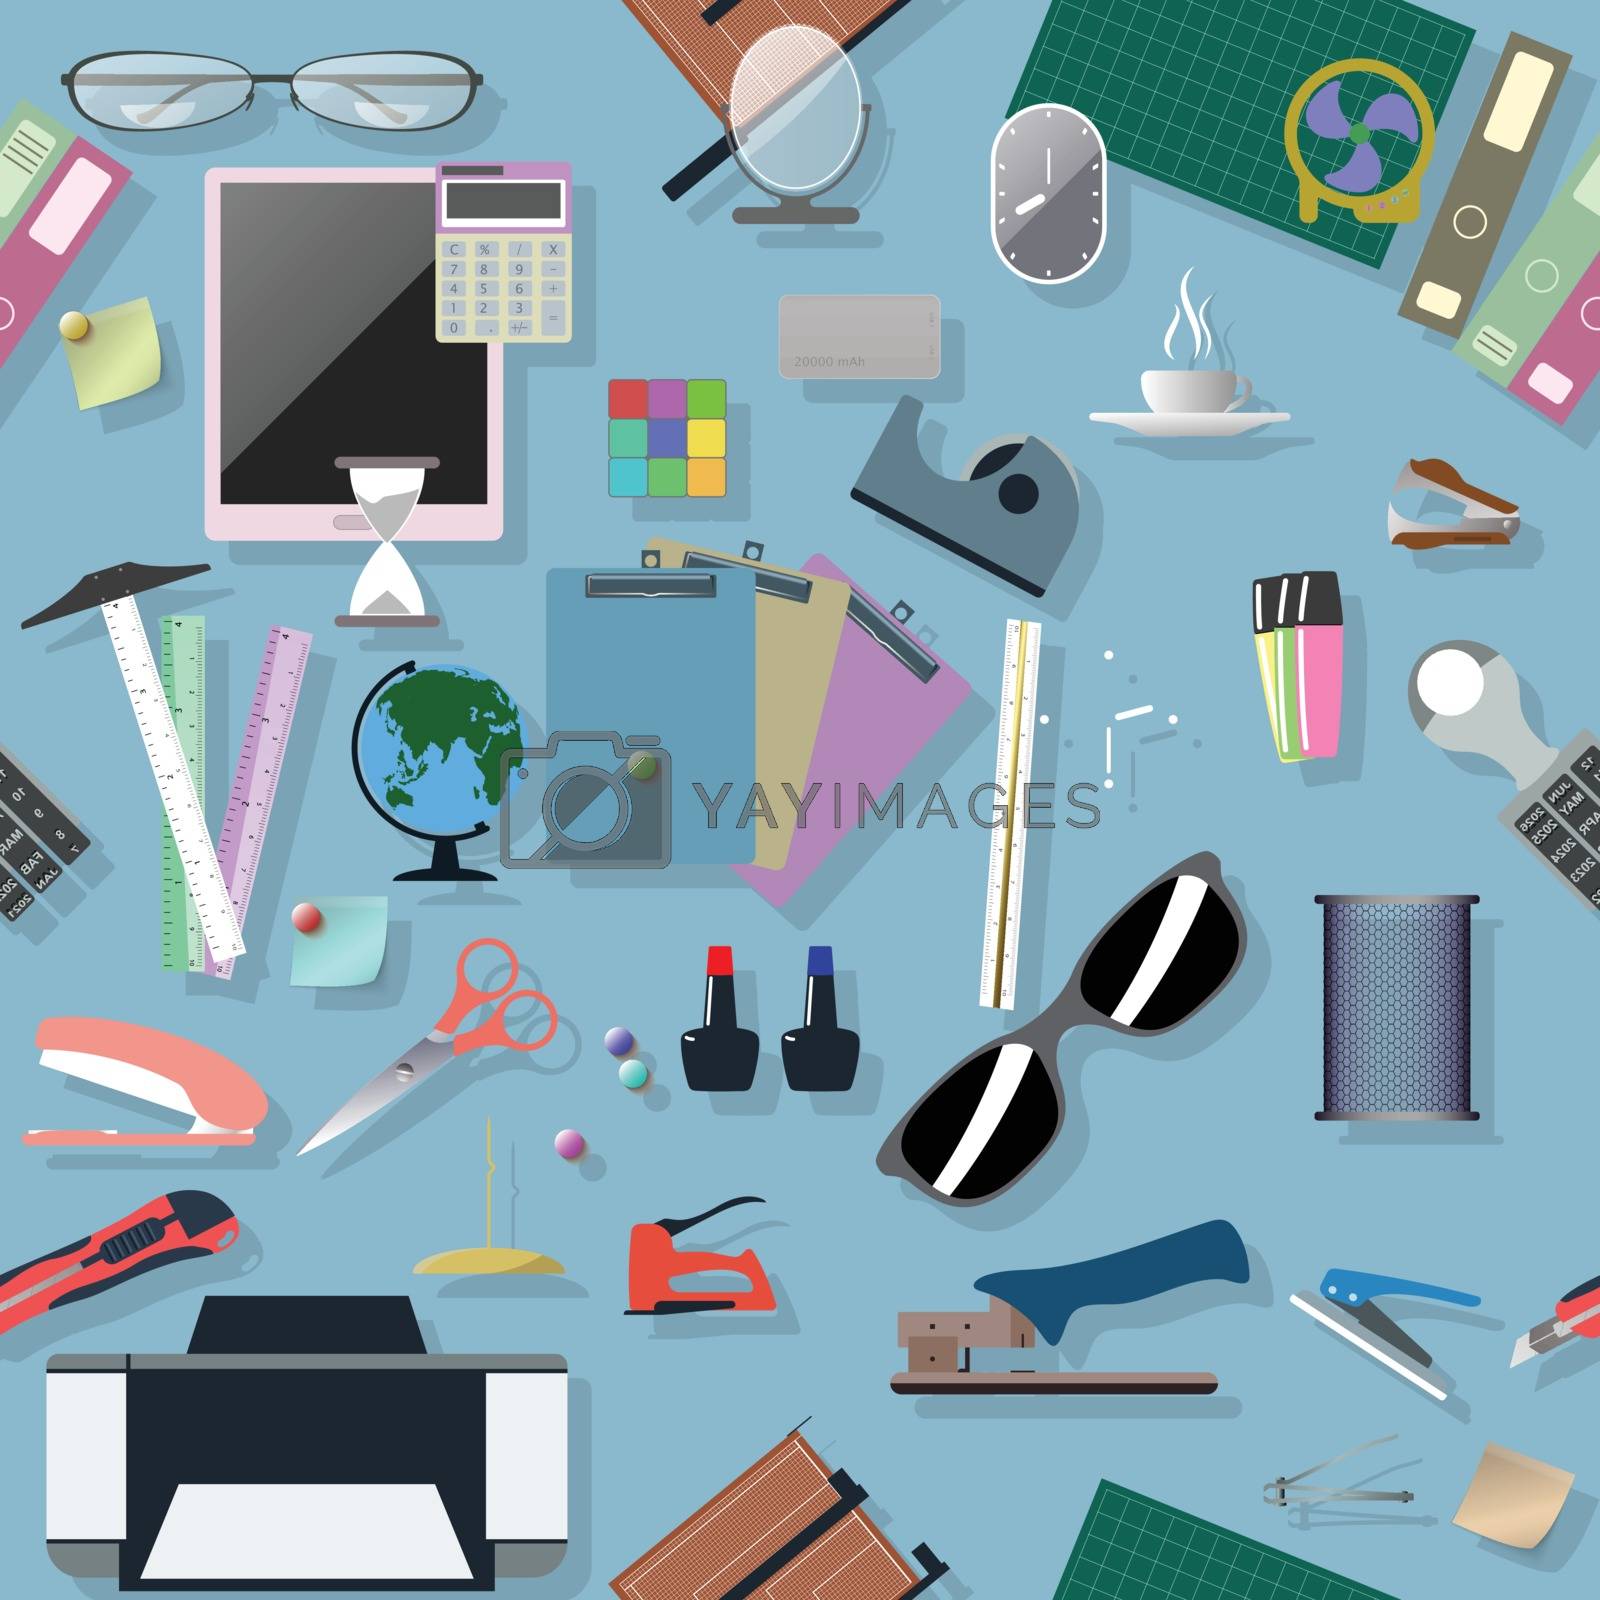 Royalty free image of Vector seamless flat pattern with office supplies. by narinbg